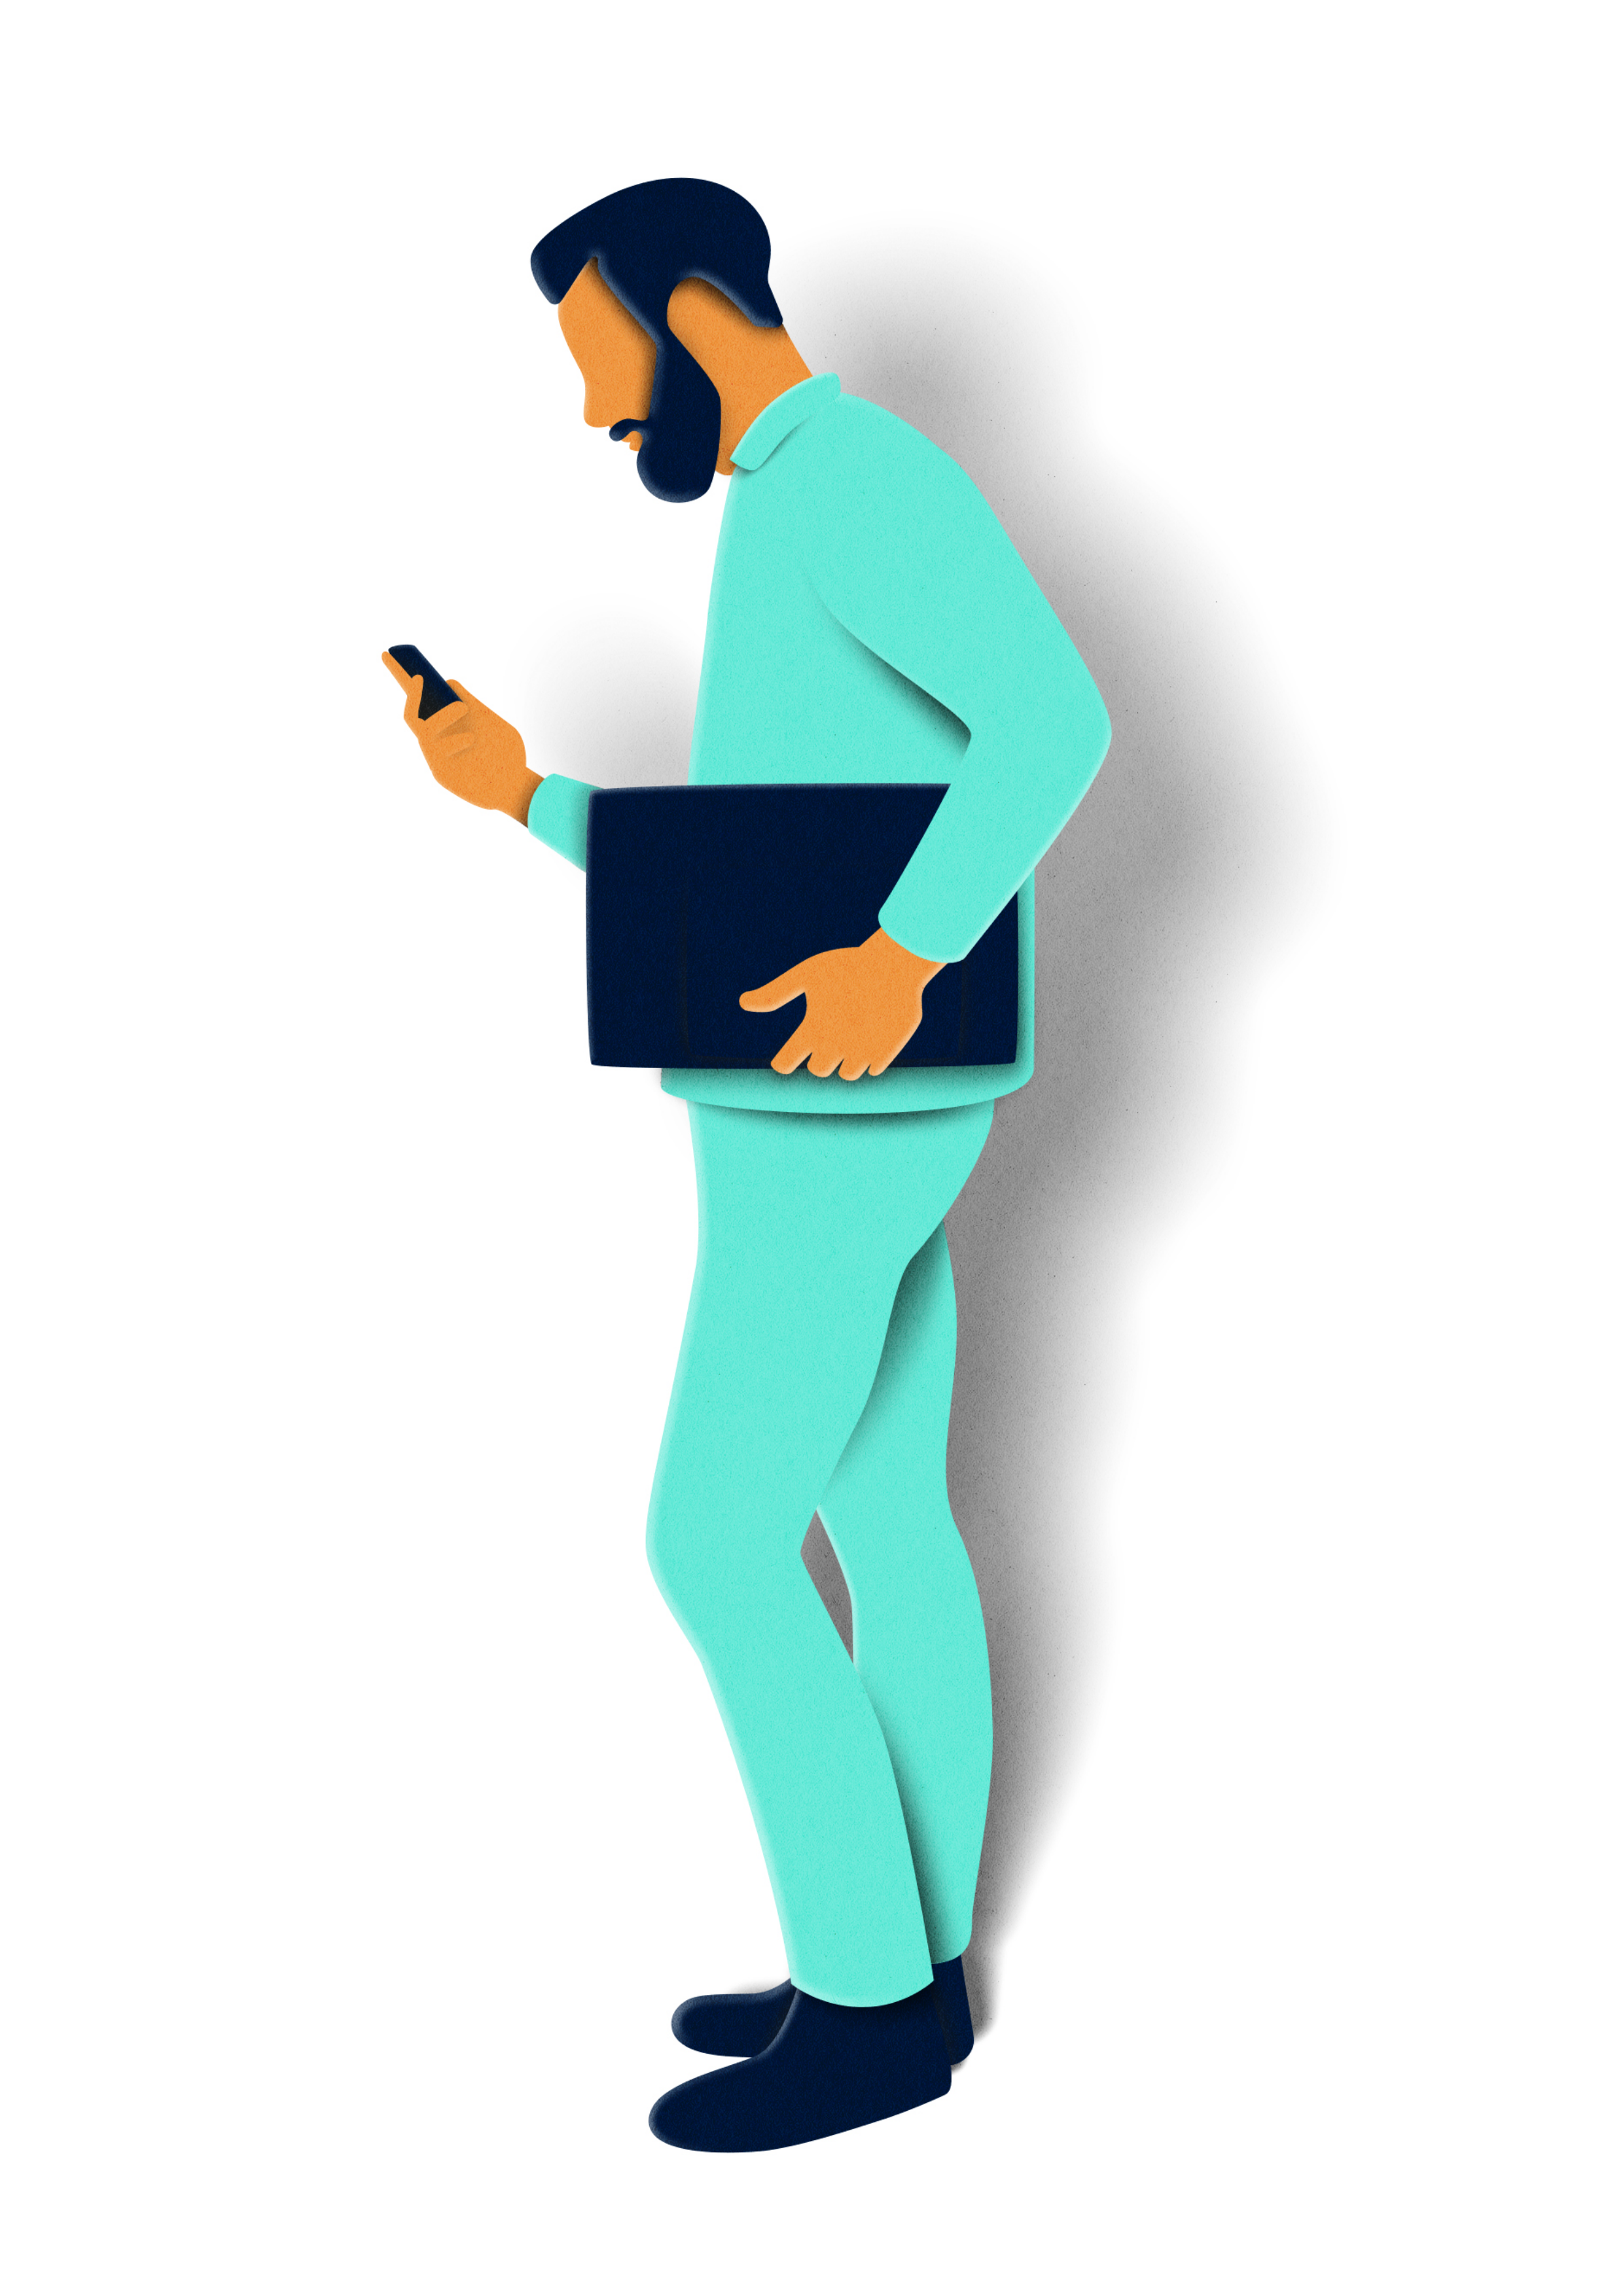 Illustration of a man using a phone and walking